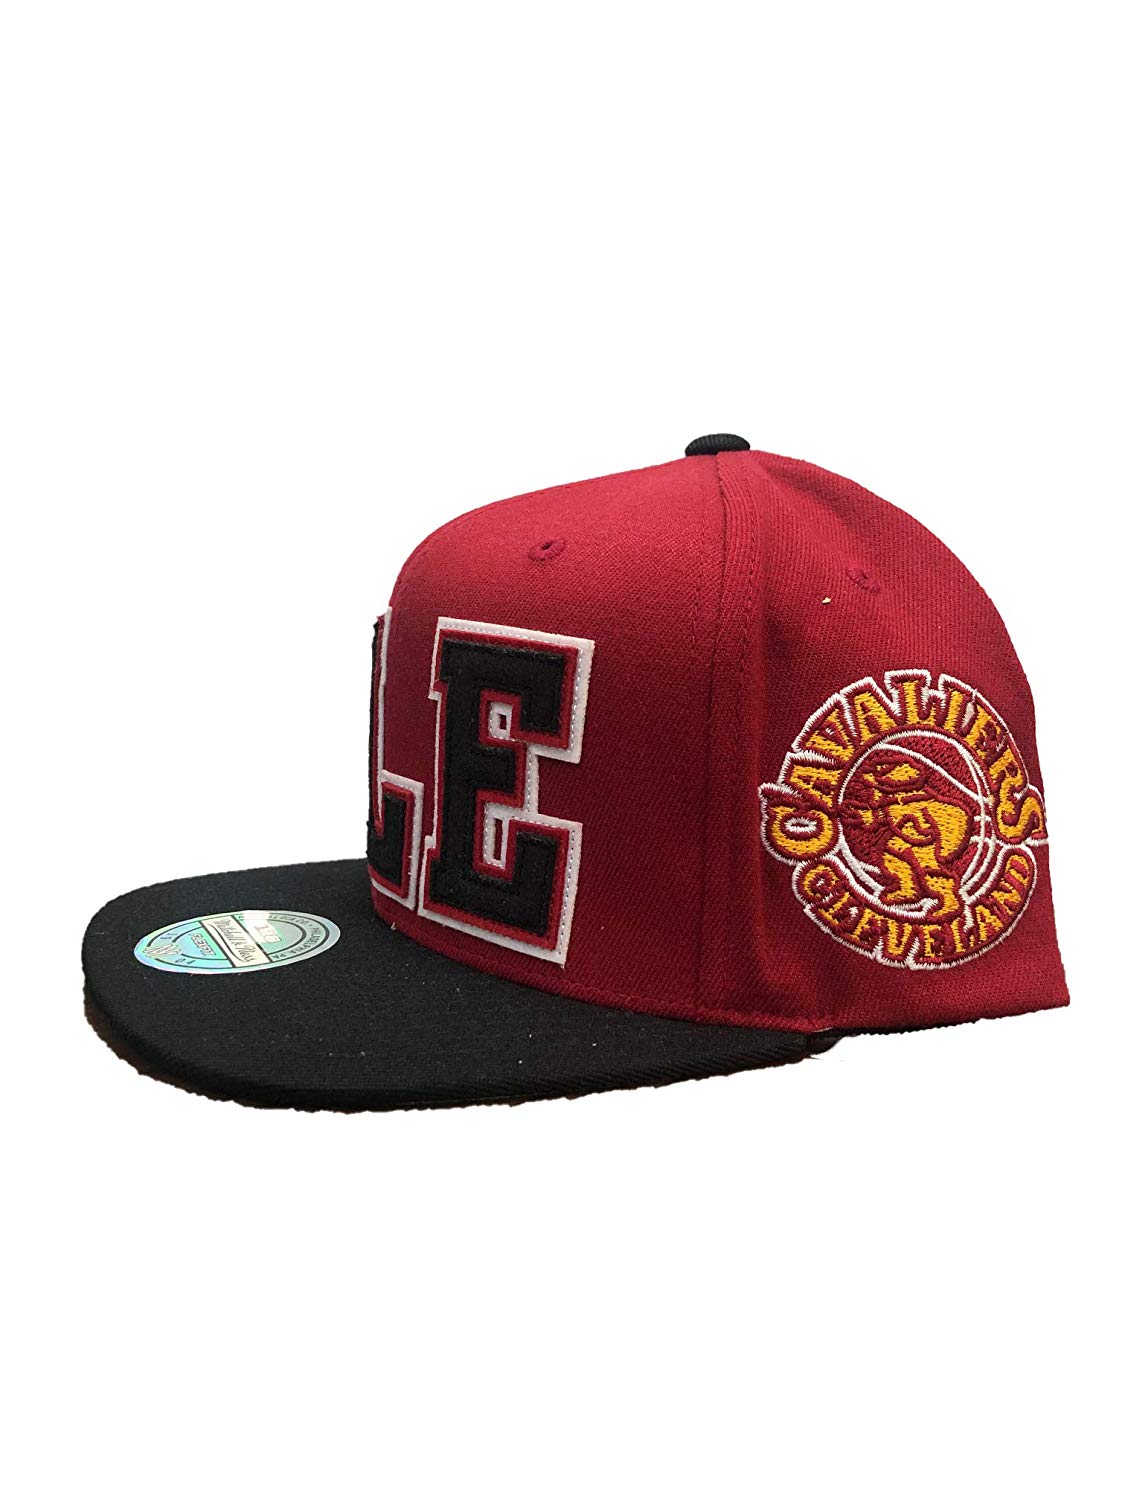 Cleveland Cavaliers Mitchell & Ness Snapback Hat